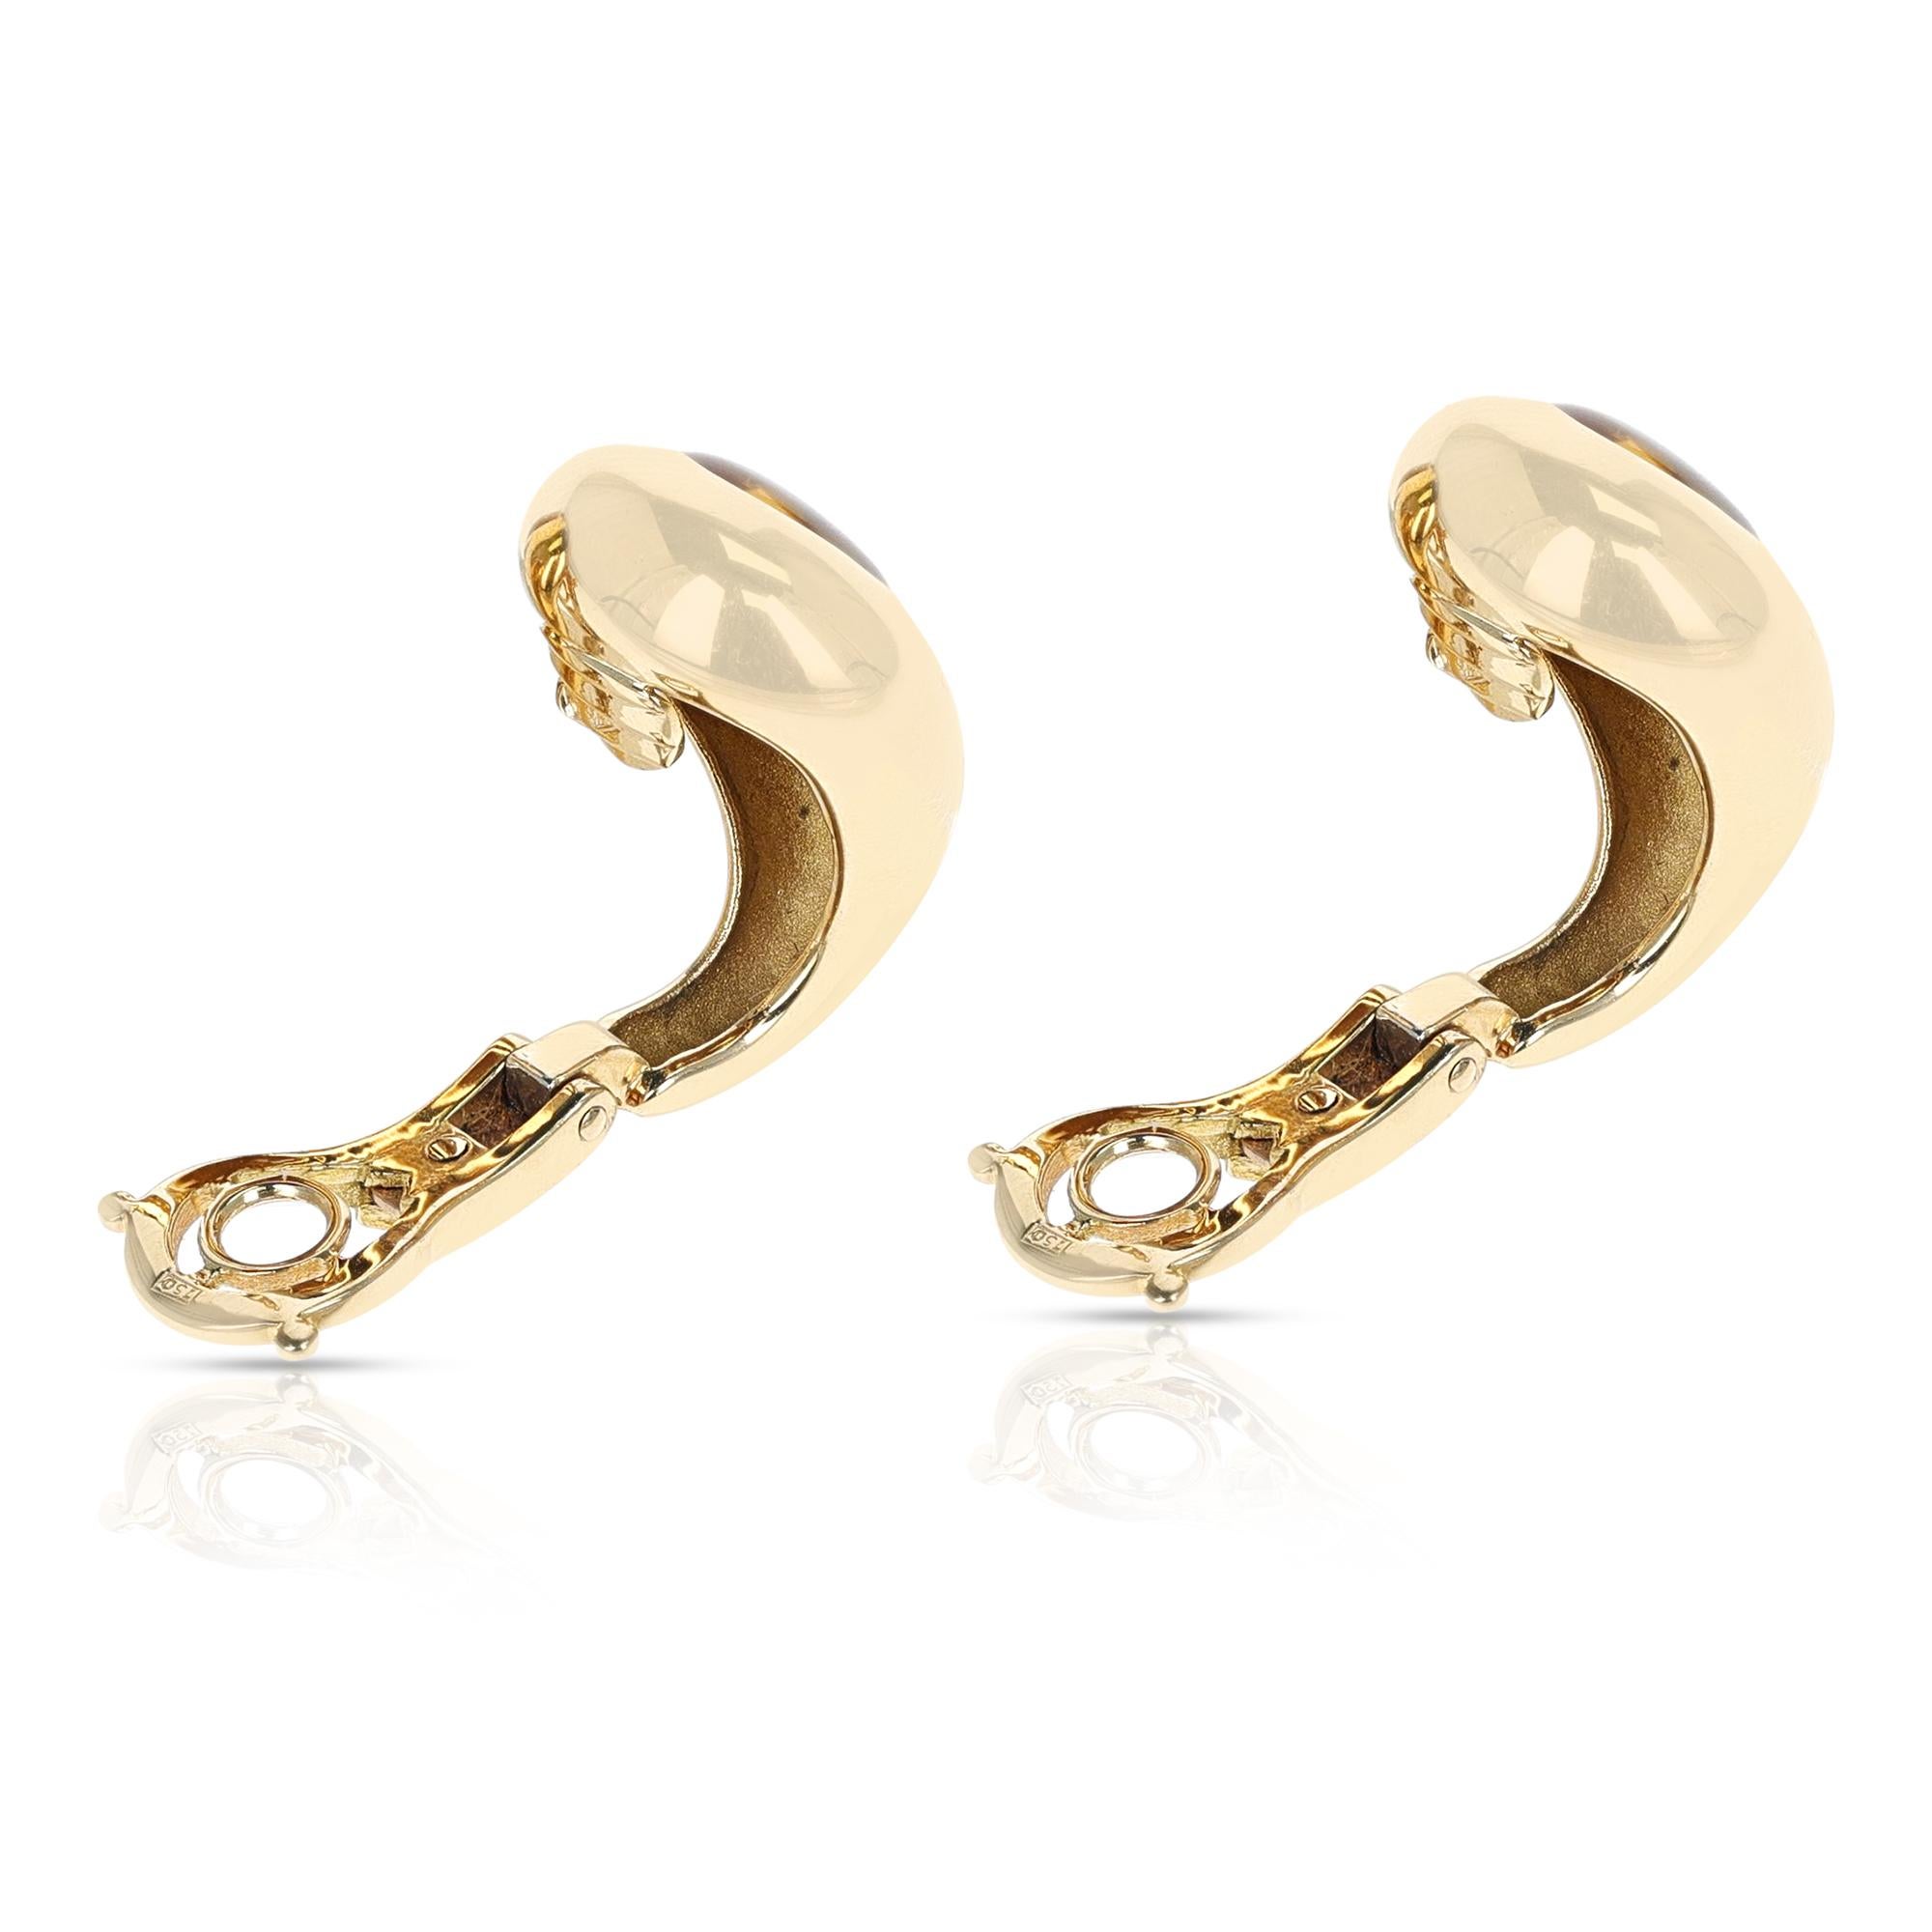 Mauboussin 2.18 ct. Citrine and 0.42 ct. Diamond Earrings, 18K Gold For Sale 2